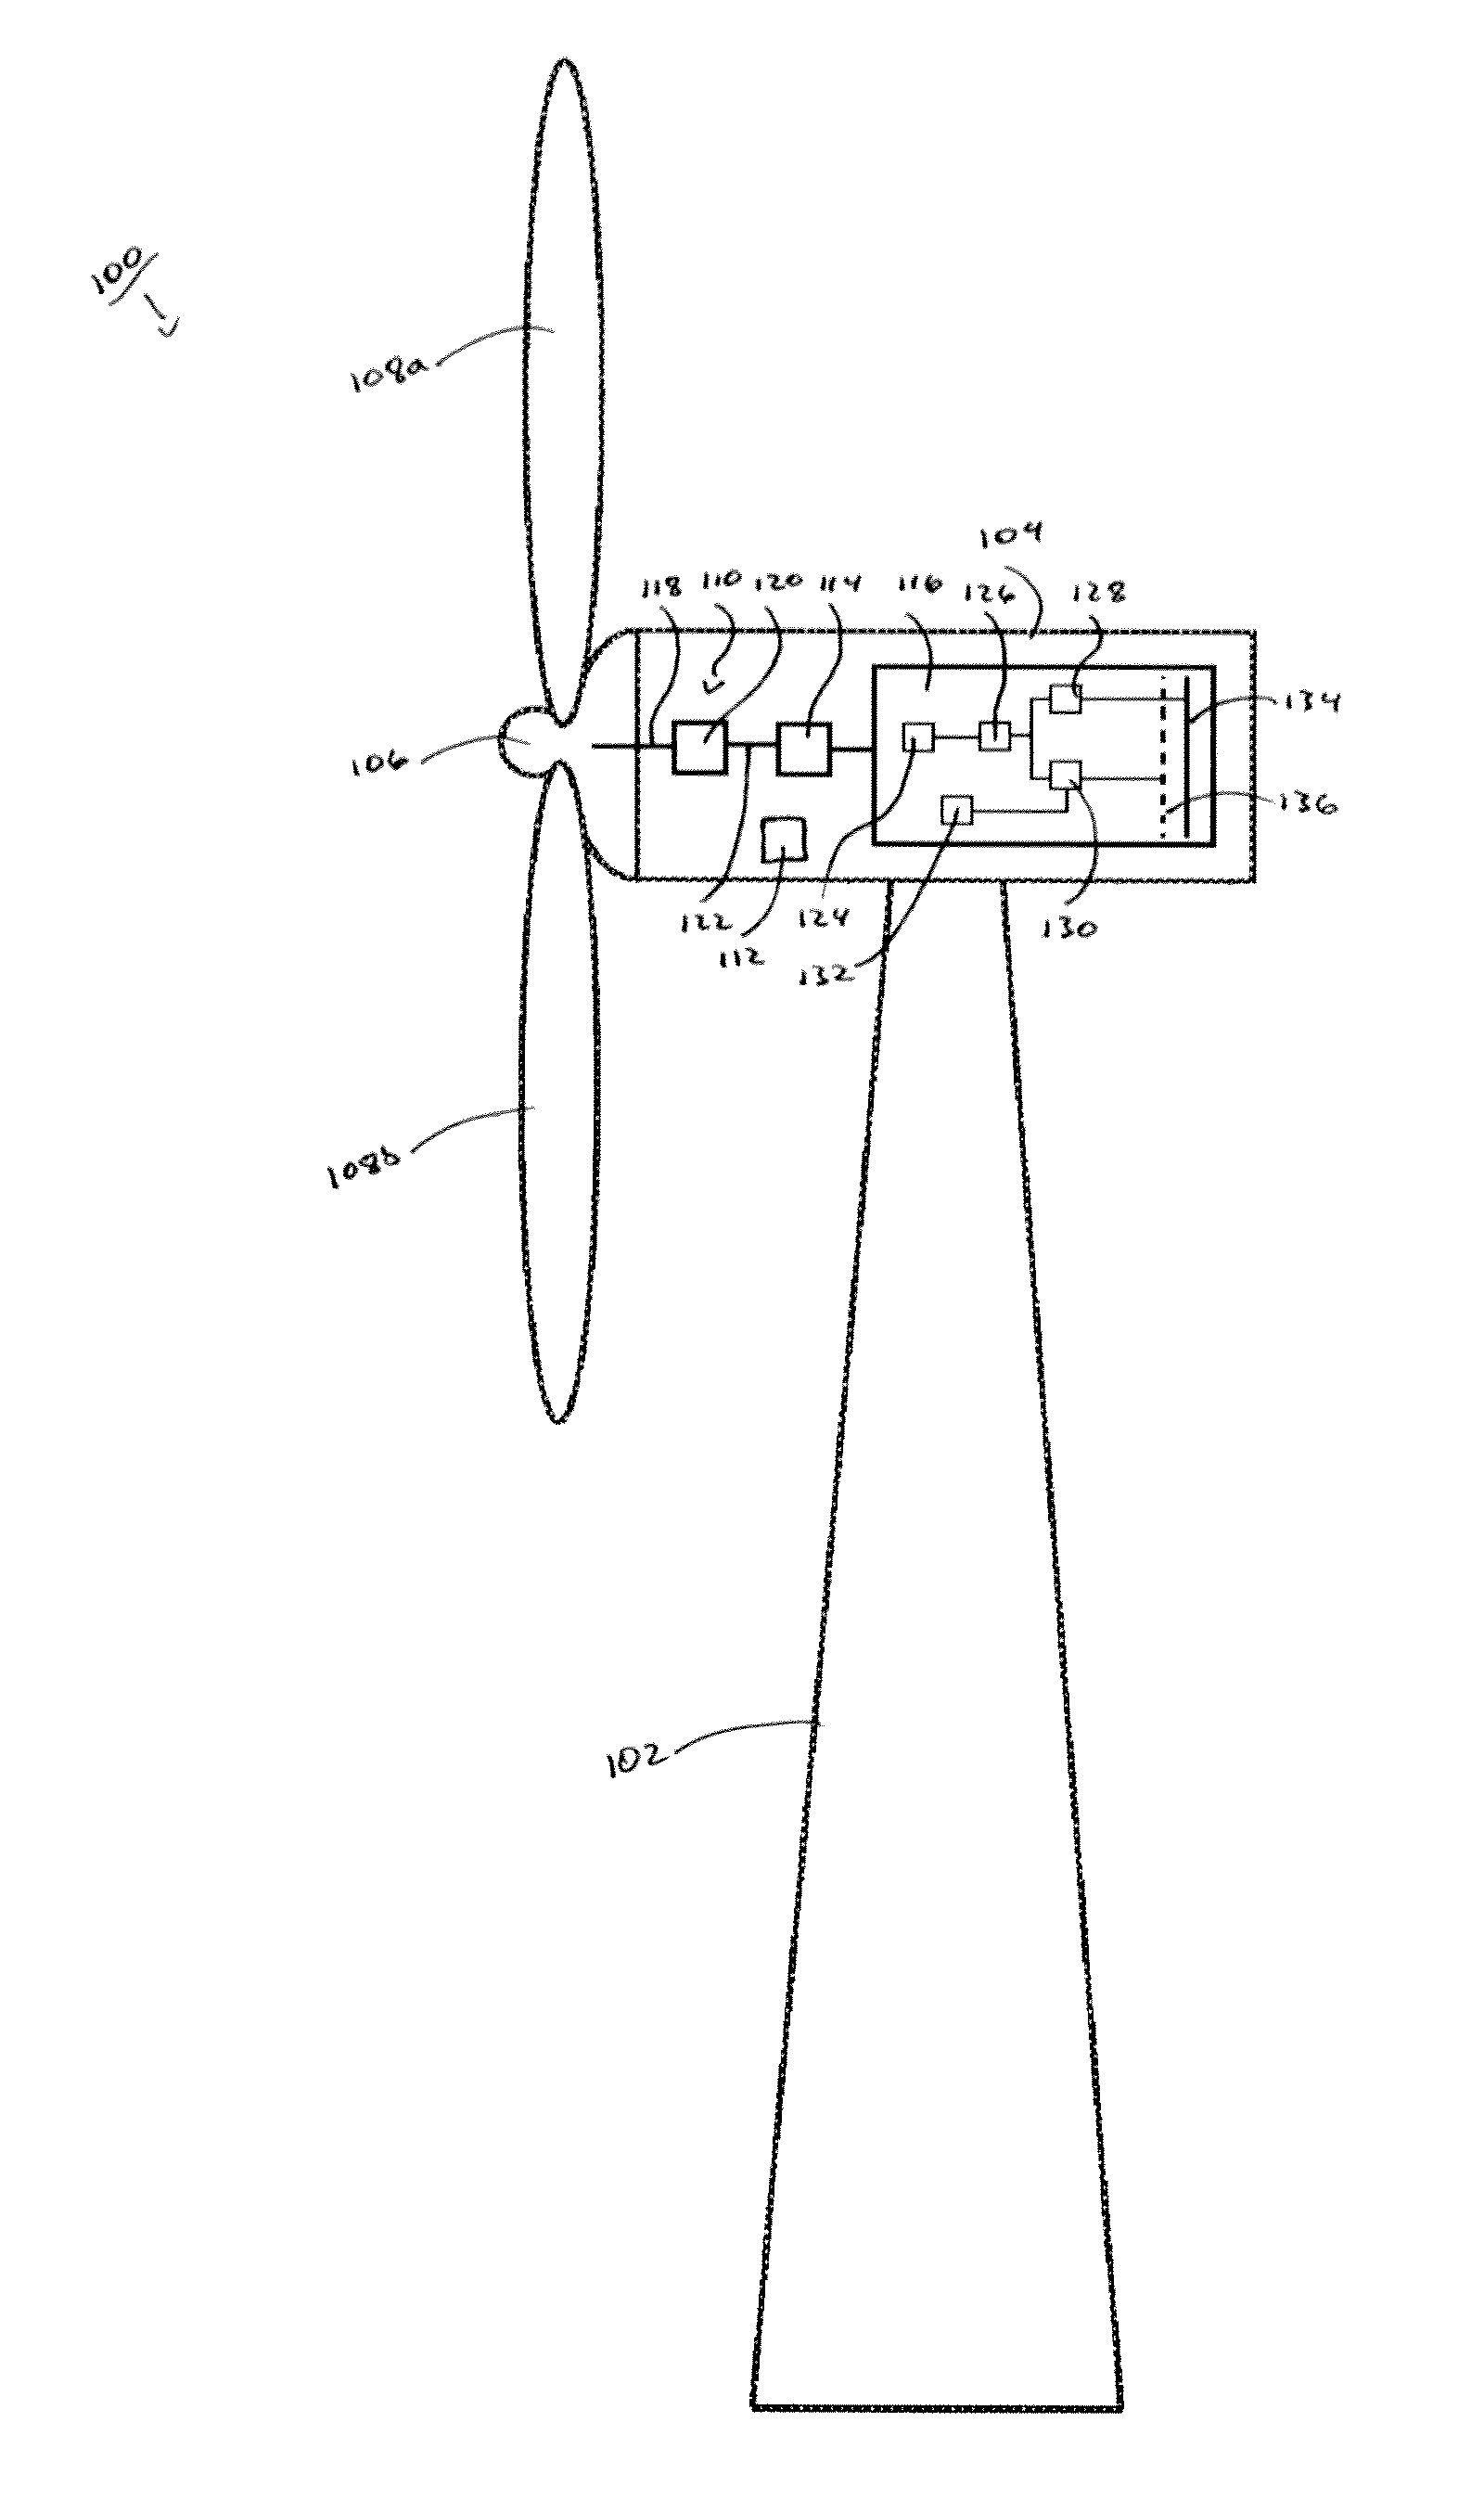 Stand alone operation system for use with utility grade synchronous wind turbine generators